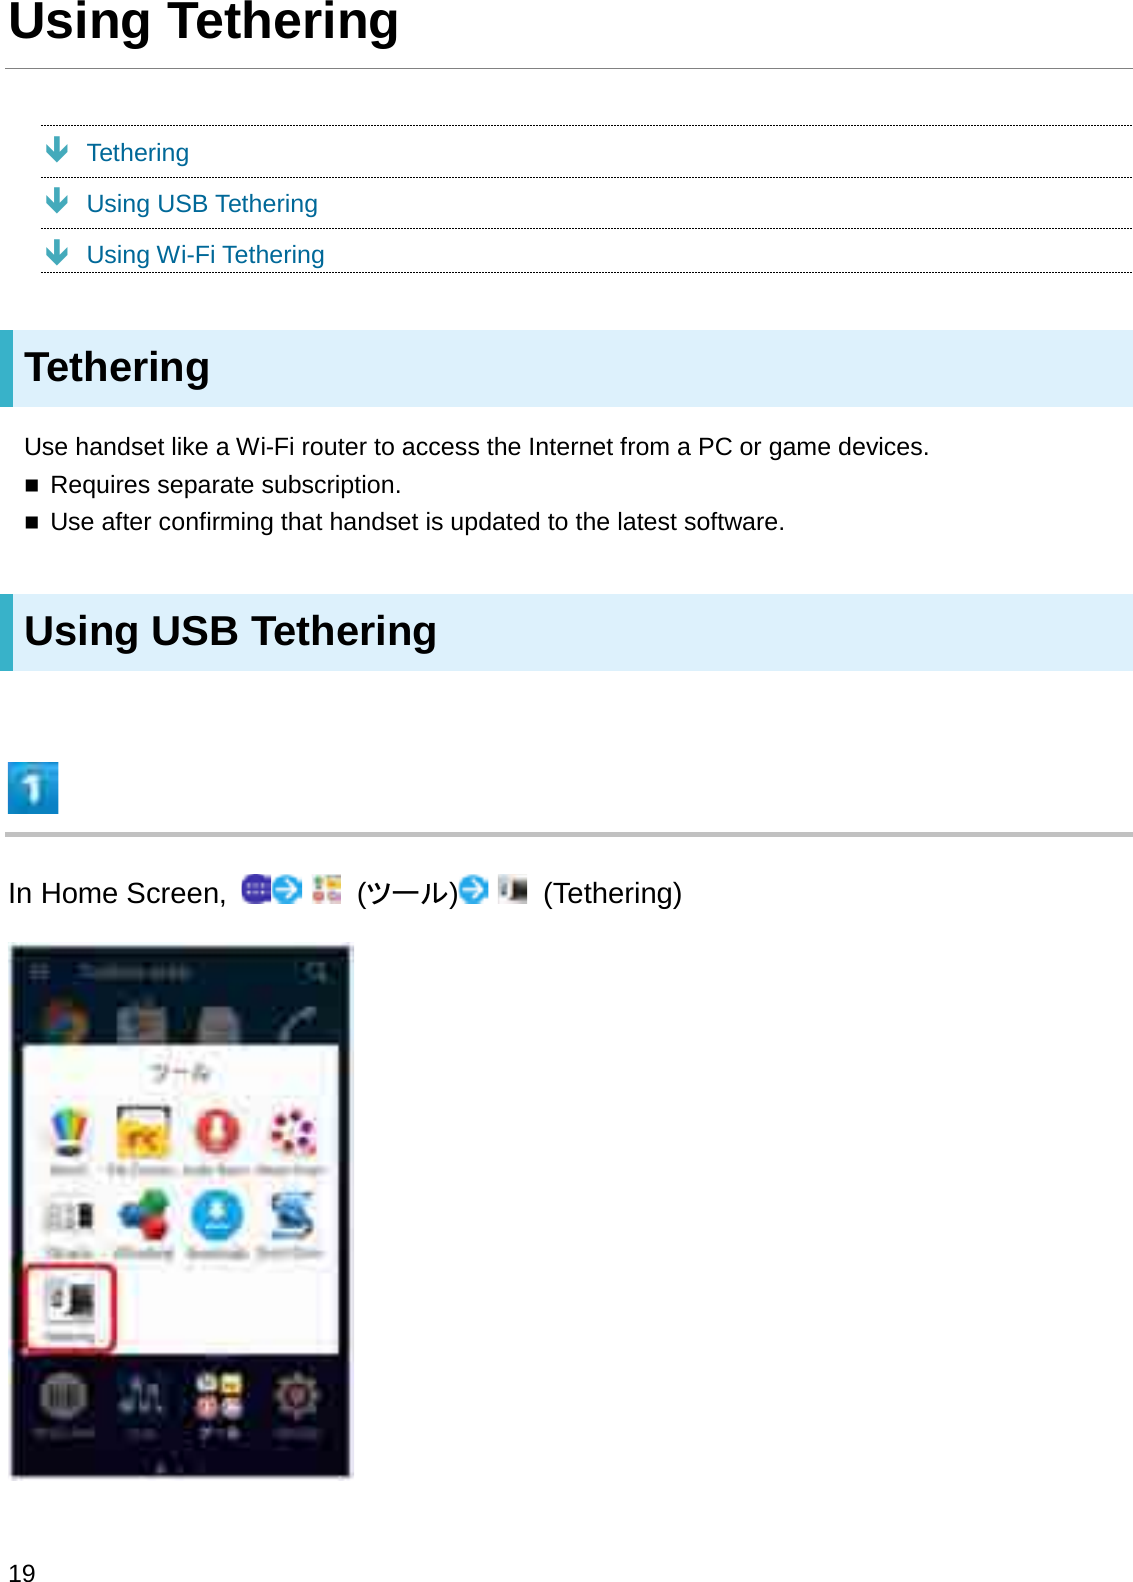 Using TetheringÐTetheringÐUsing USB TetheringÐUsing Wi-Fi TetheringTetheringUse handset like a Wi-Fi router to access the Internet from a PC or game devices.Requires separate subscription.Use after confirming that handset is updated to the latest software.Using USB TetheringIn Home Screen,  (䝒䞊䝹) (Tethering)19